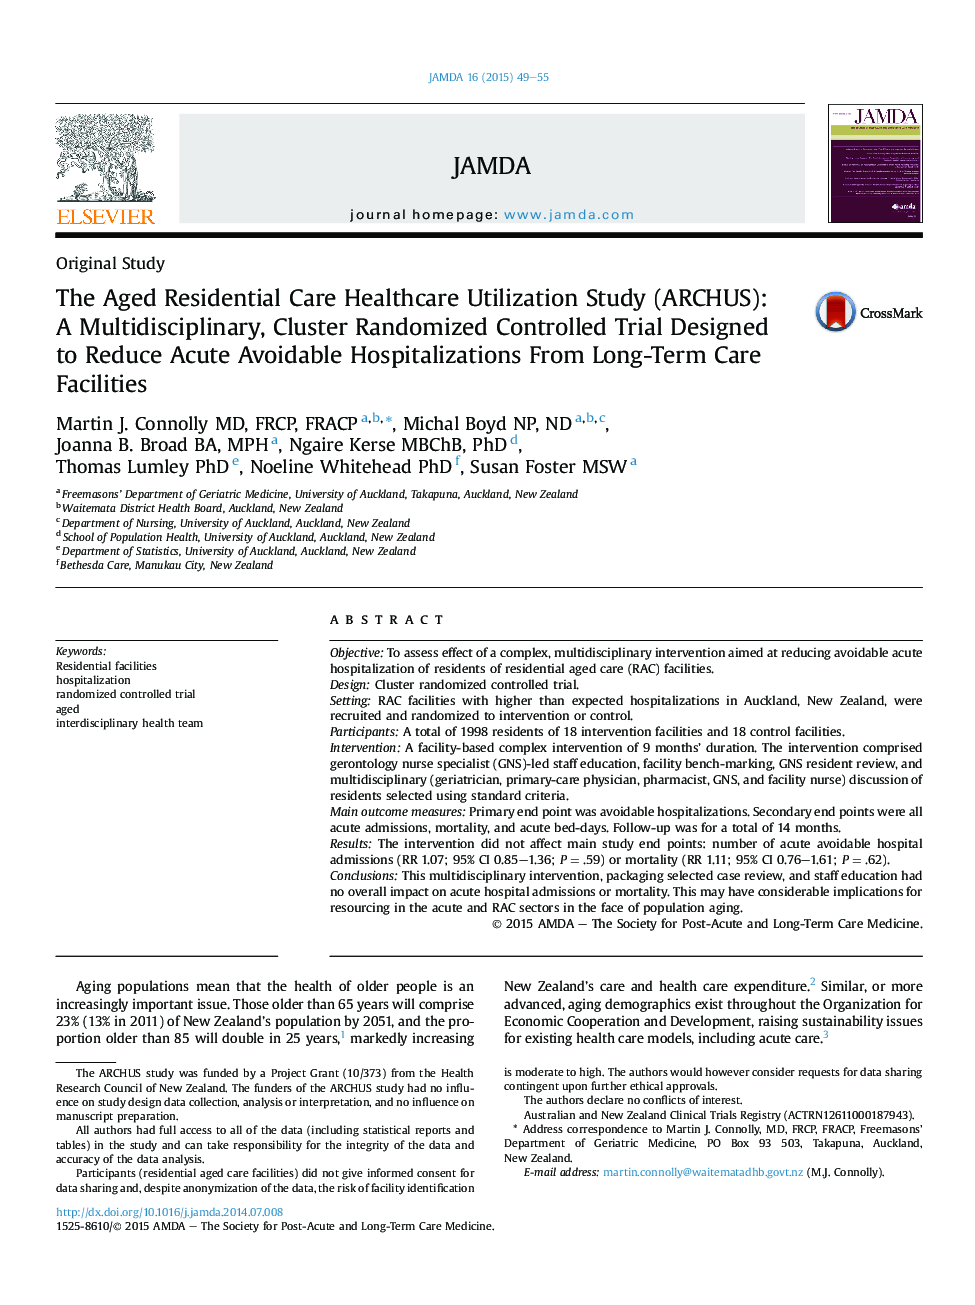 The Aged Residential Care Healthcare Utilization Study (ARCHUS): A Multidisciplinary, Cluster Randomized Controlled Trial Designed to Reduce Acute Avoidable Hospitalizations From Long-Term Care Facilities